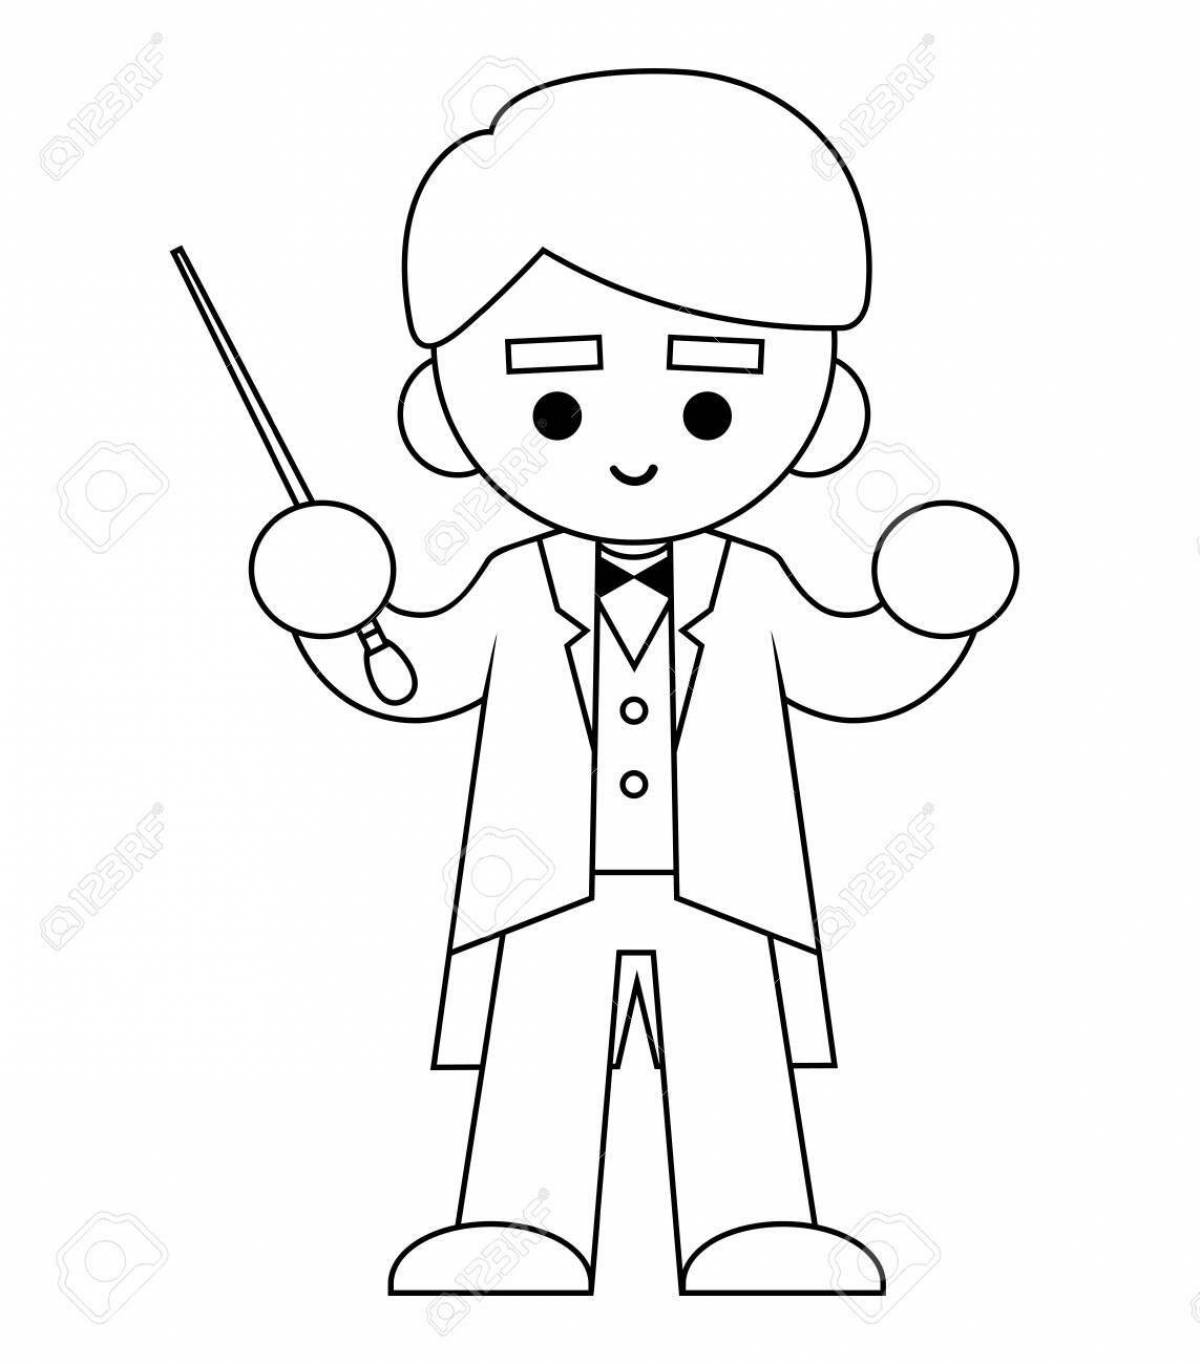 Coloring page elegant conductor